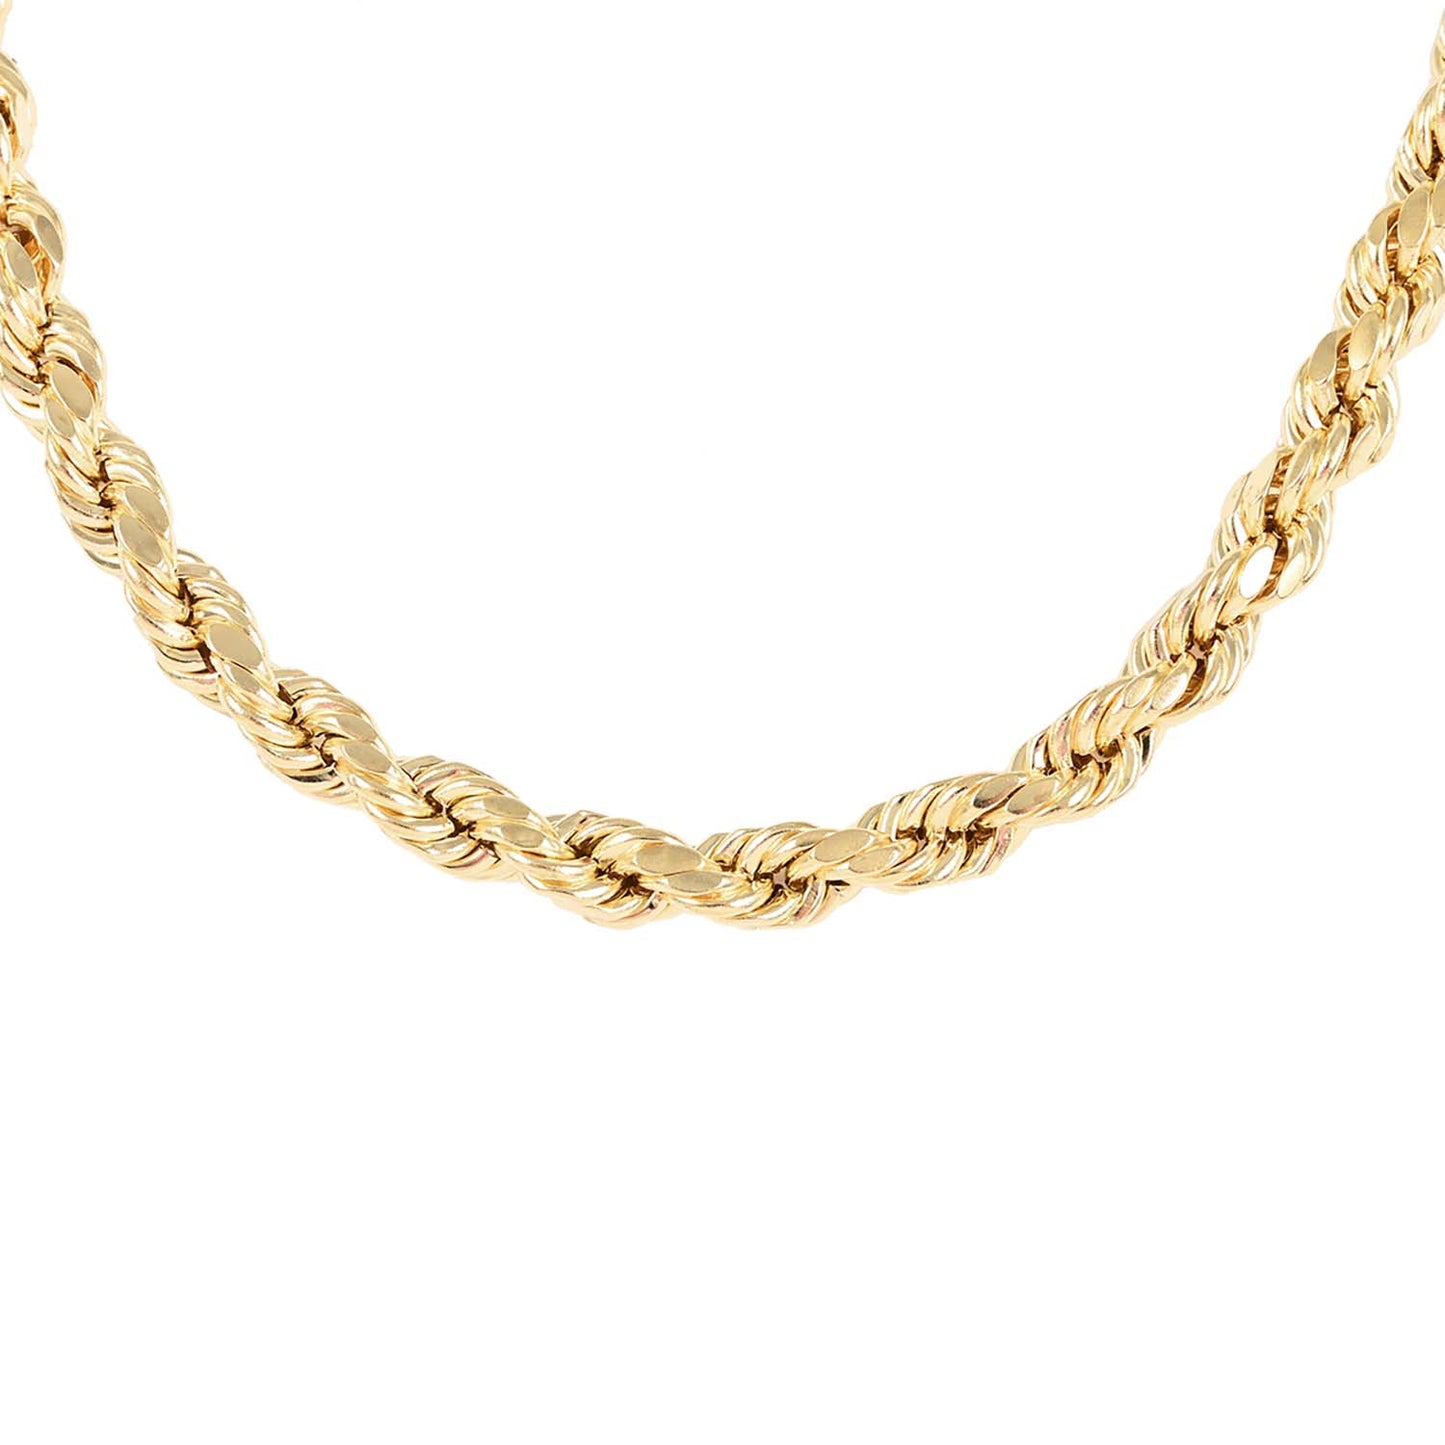 10K Gold Chains/Necklace